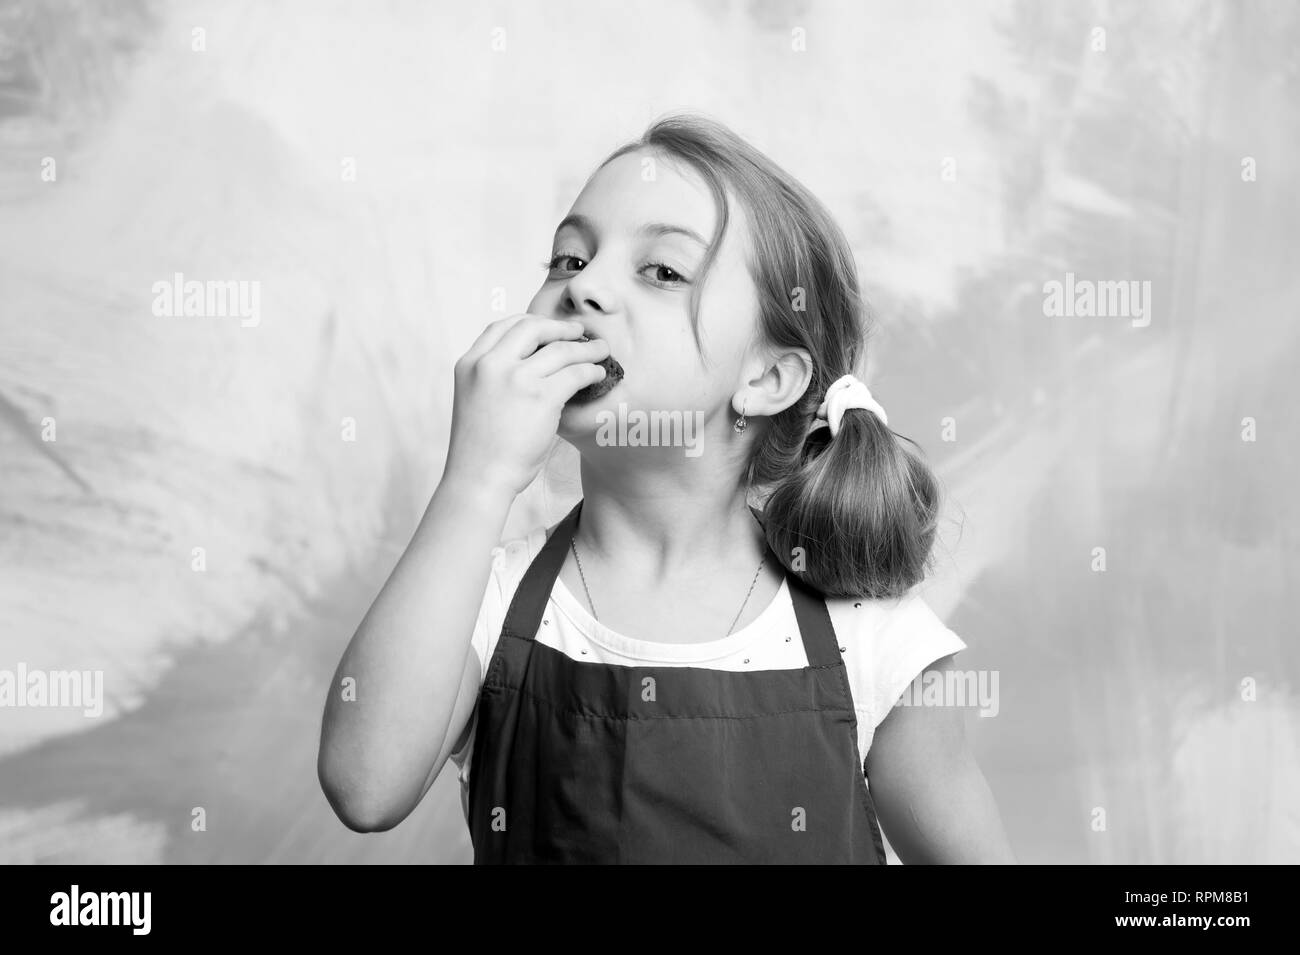 Child biting cake. Girl eating cupcake. Healthy food and diet concept. Baking and delicious bakery. Baby cook in red chef apron on colorful abstract wall. Stock Photo